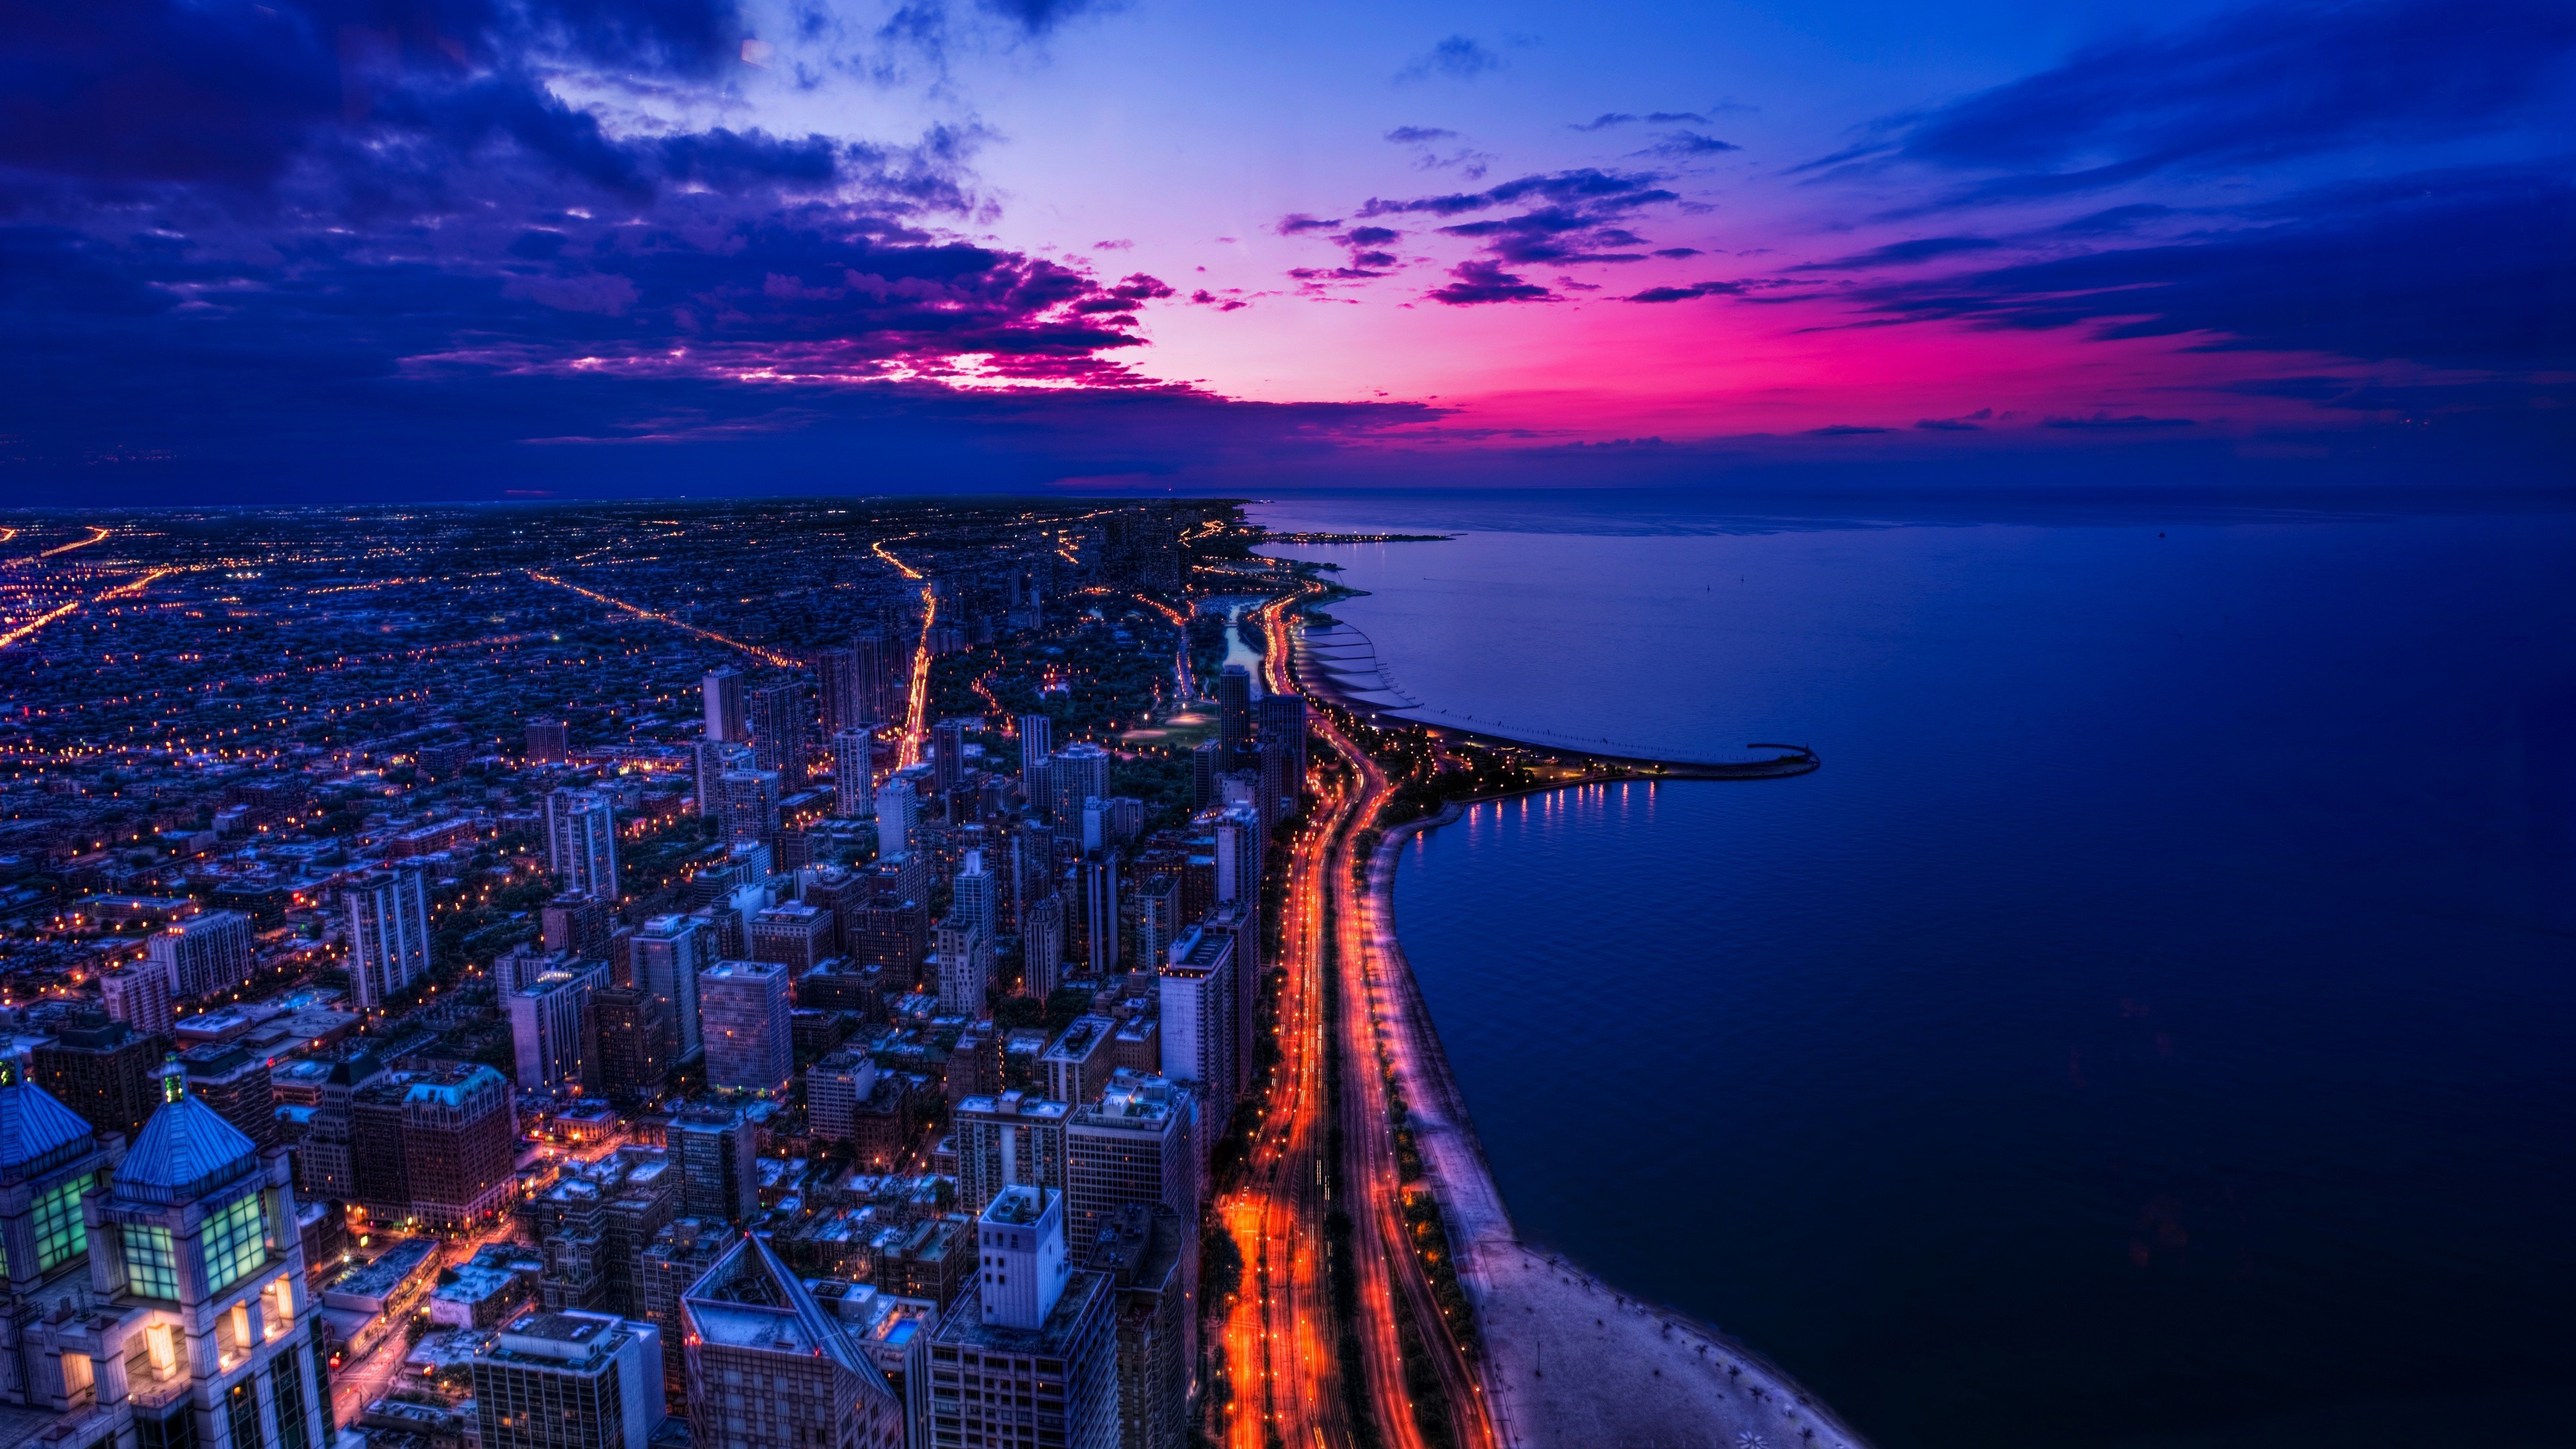 Chicago City View At Sunset Wallpaper Hd City 4k Wallpapers Images Photos And Background Wallpapers Den